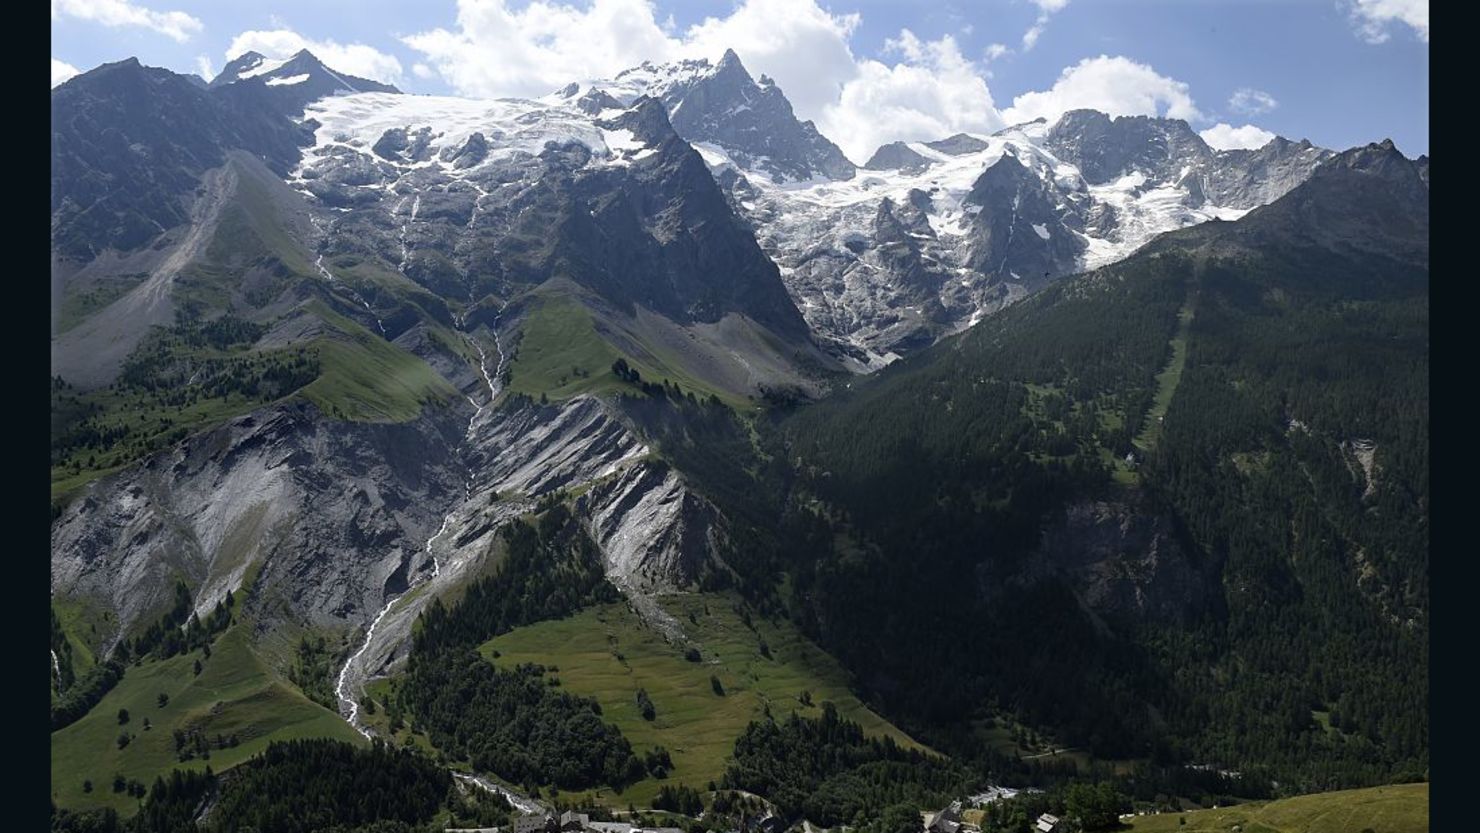 A view of La Meije, a French mountain where two climbers fell to their deaths Sunday.